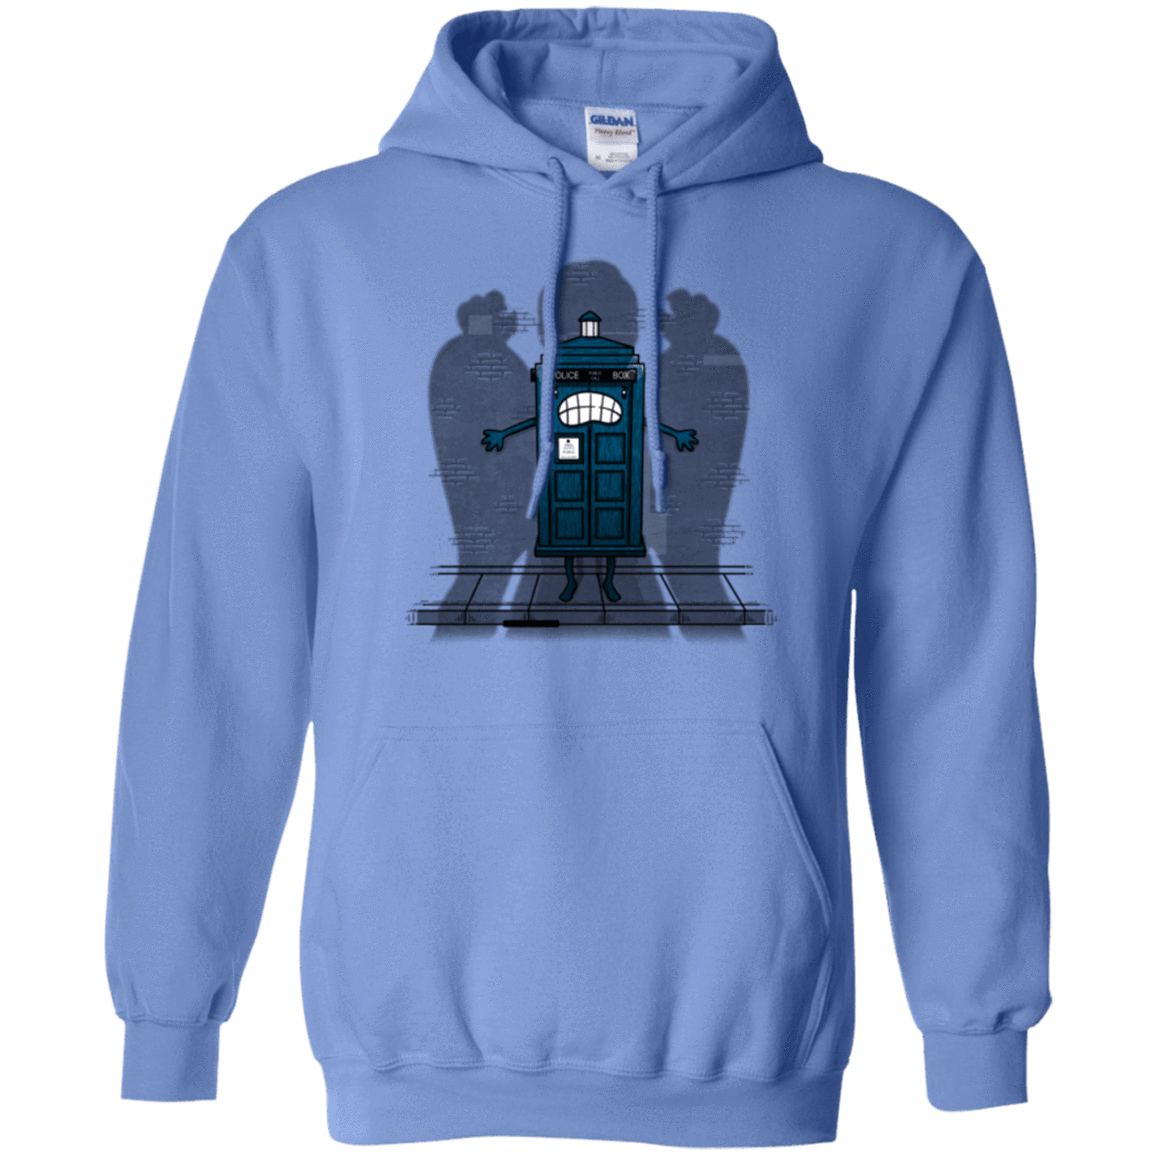 Sweatshirts Carolina Blue / Small Angels Are Here Pullover Hoodie